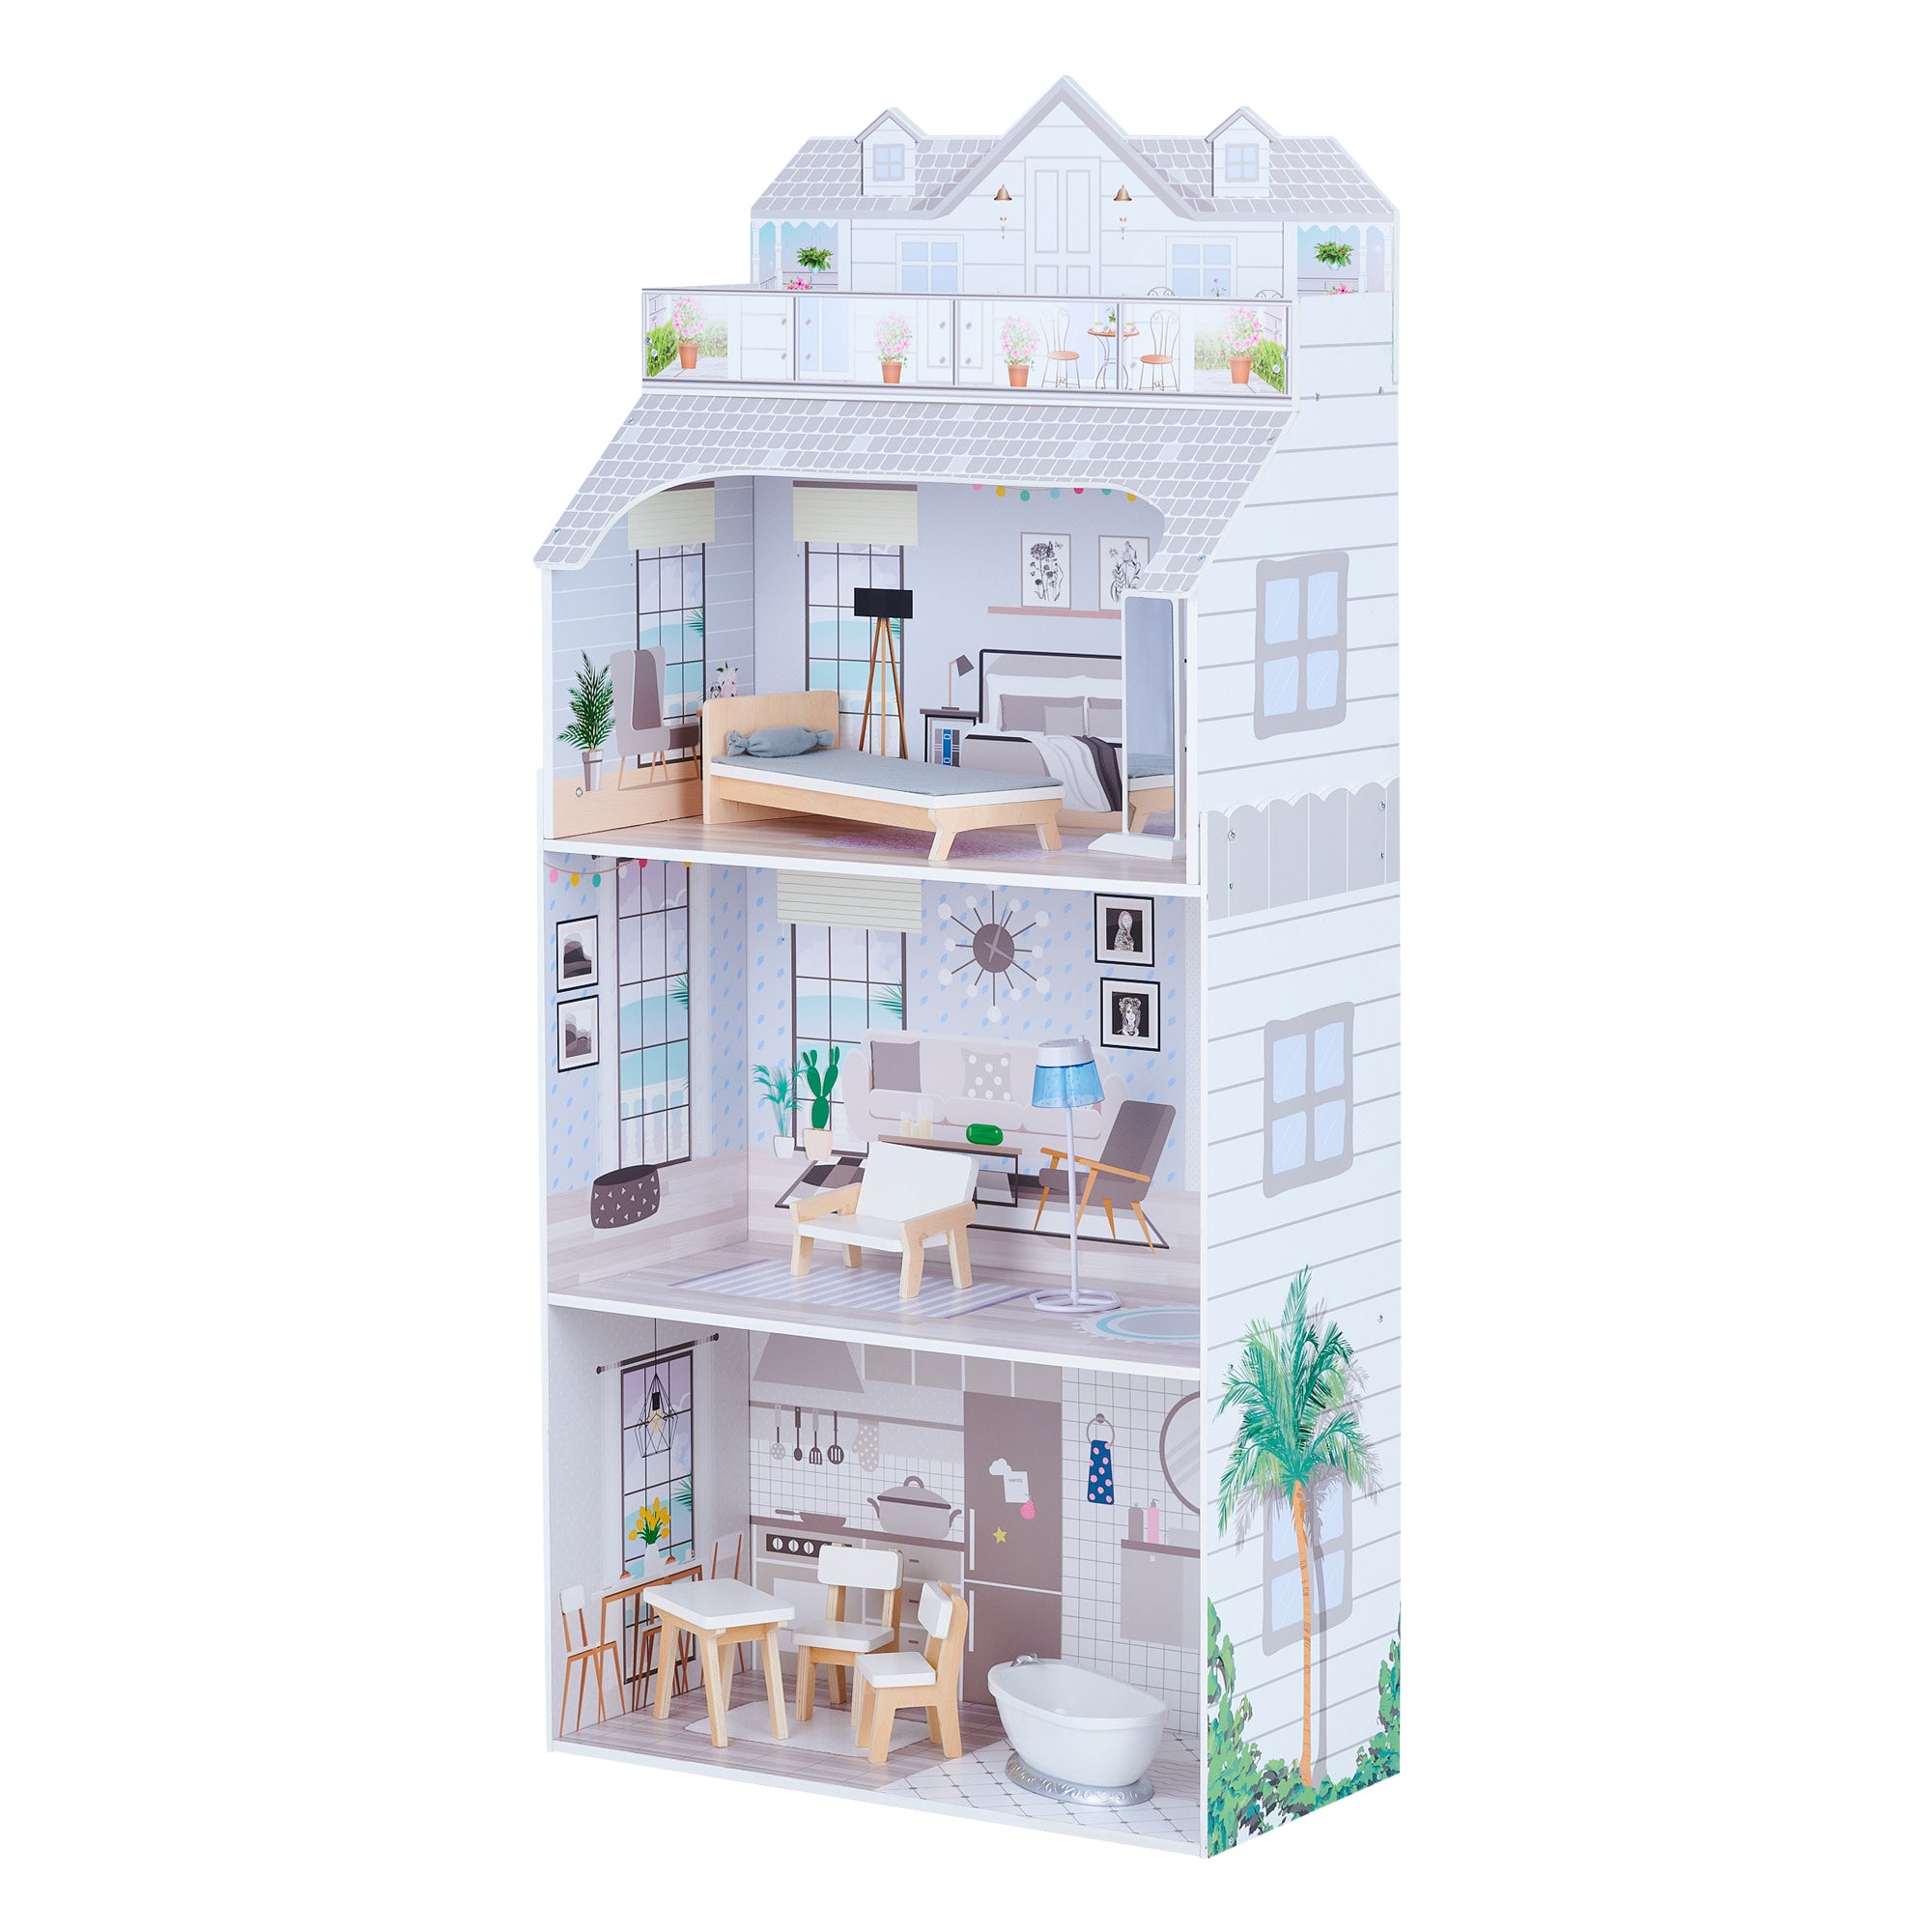 Olivia's Little World 3 Story Deluxe Dollhouse with Accessories for 12" Dolls, Gray